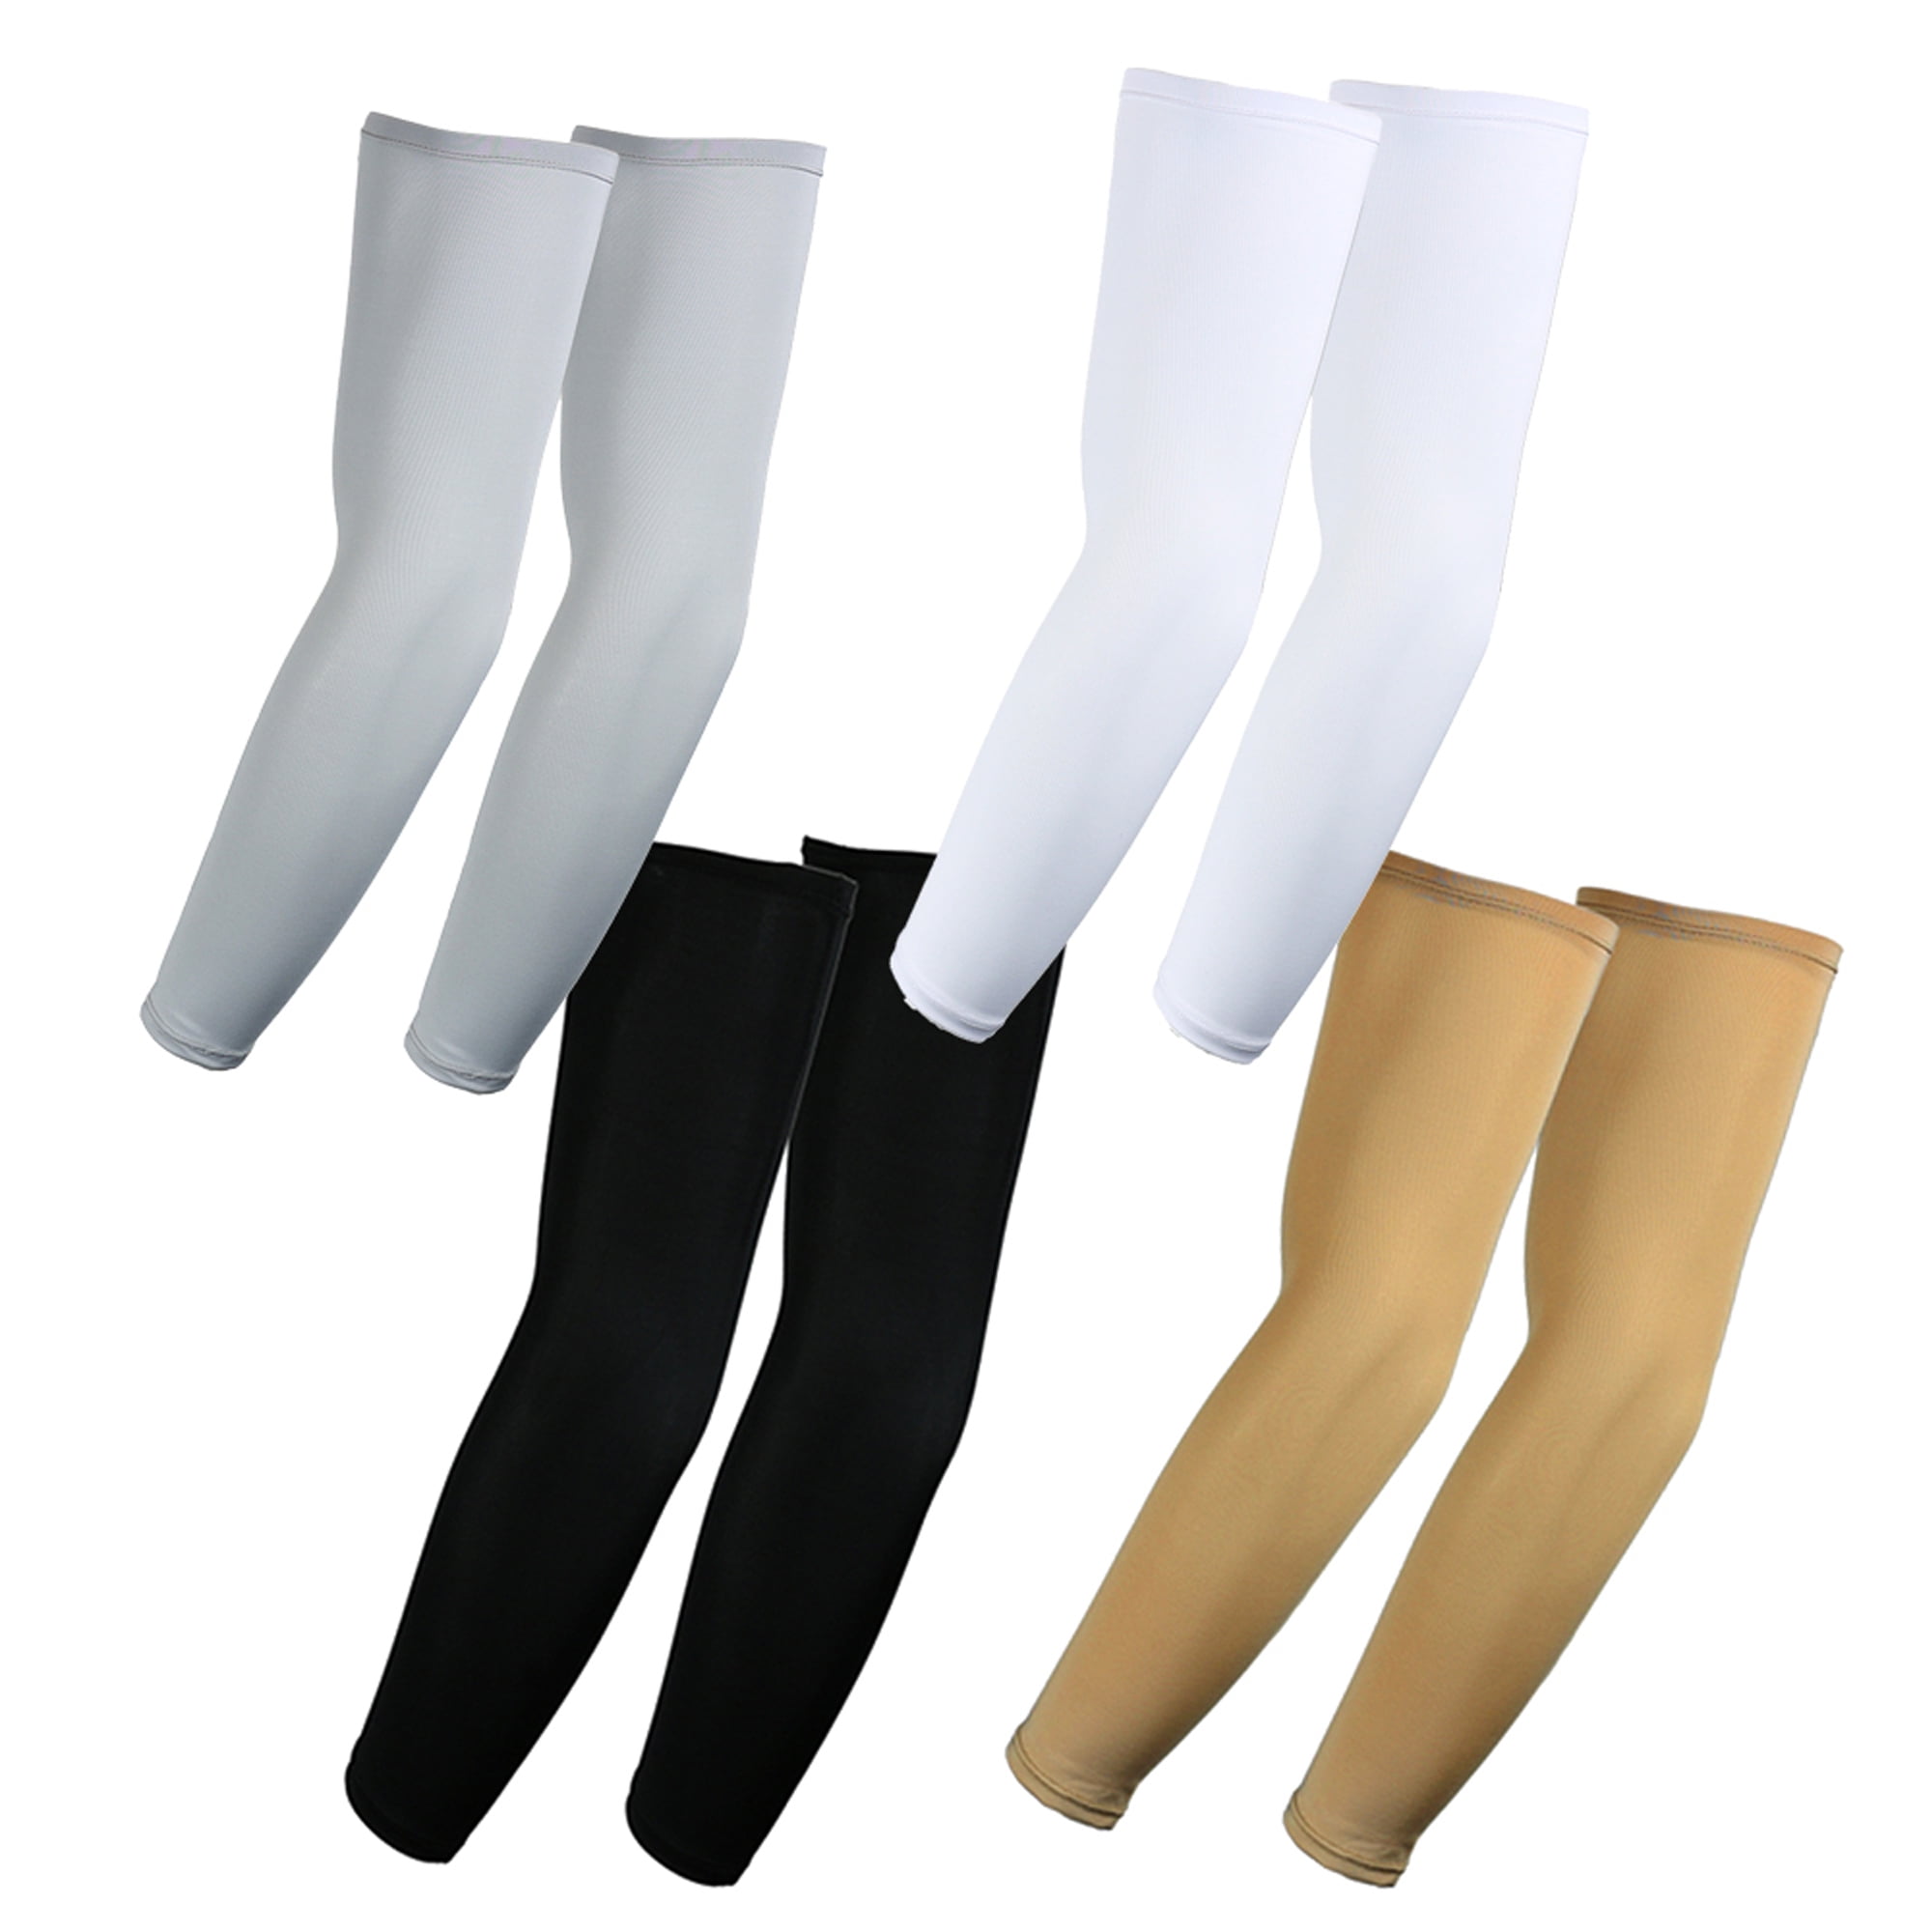 4 New 18"  Protective Arm Sleeves Free US Ship 